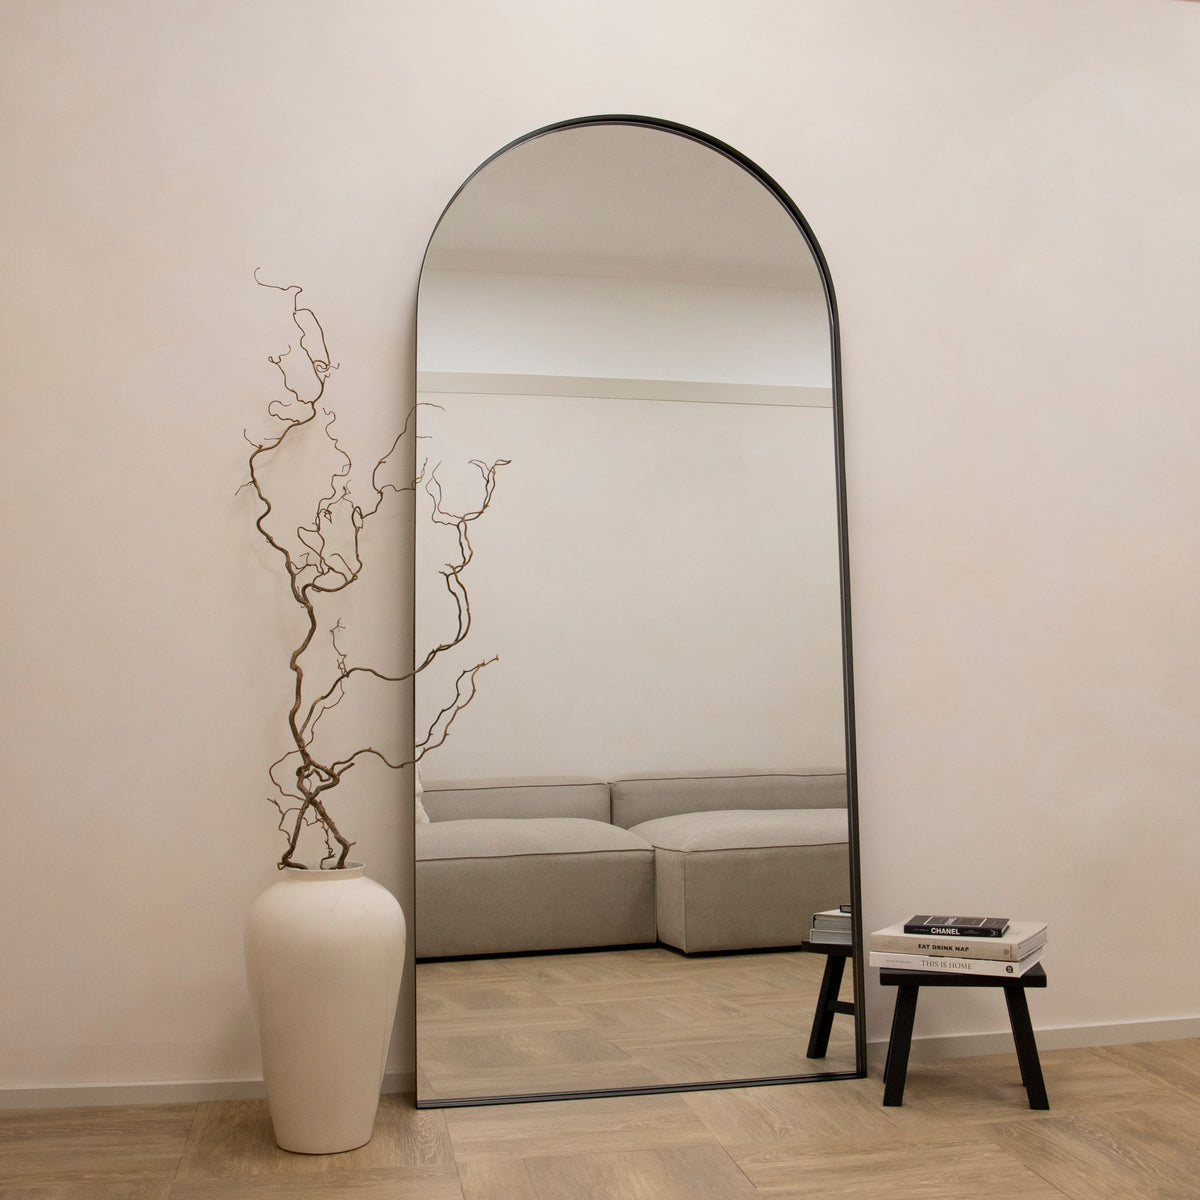 Full length arched black extra large metal mirror leaning against wall